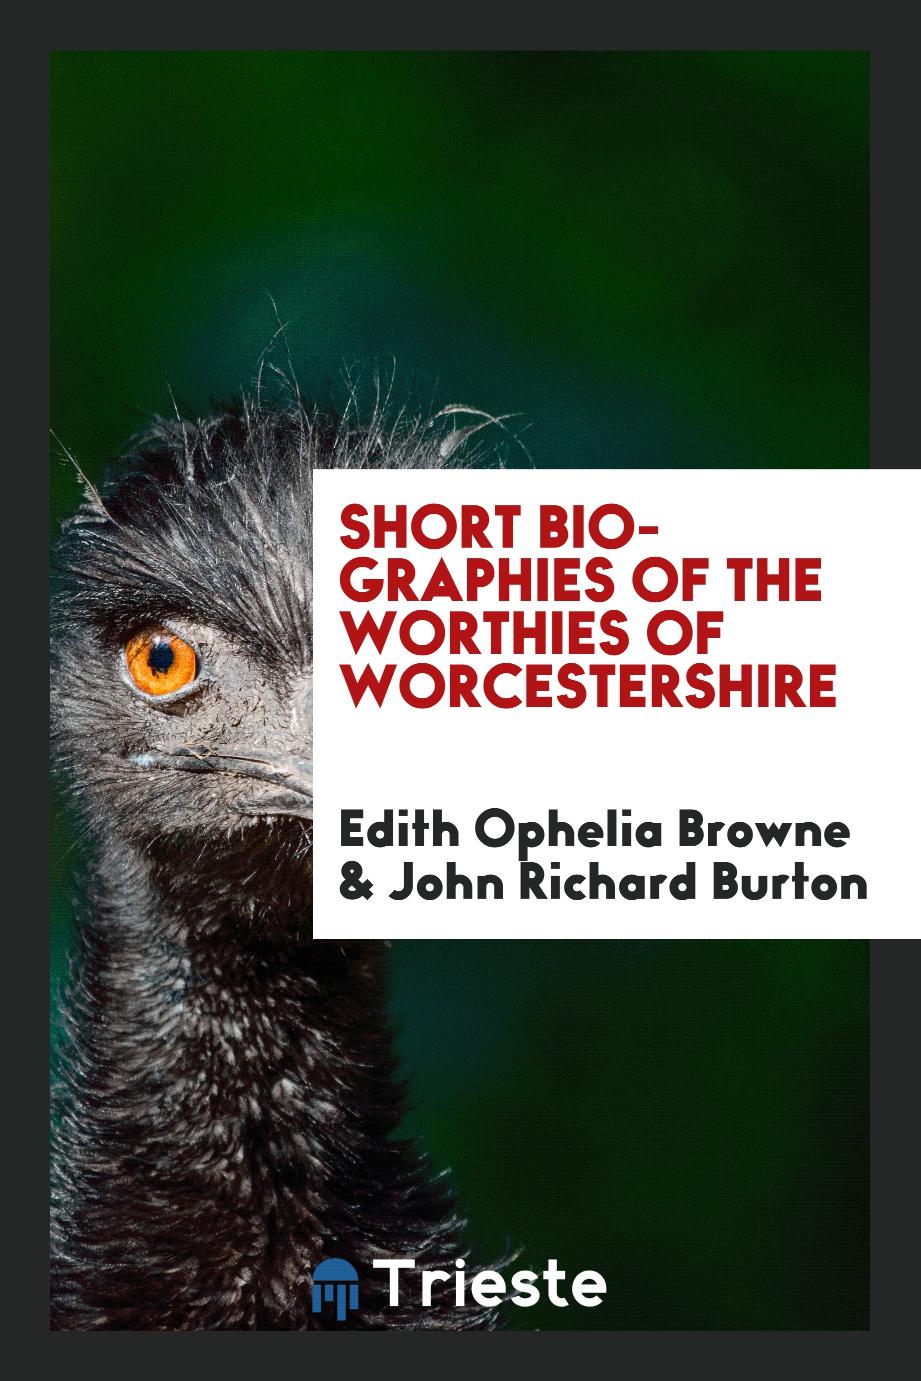 Short biographies of the worthies of Worcestershire